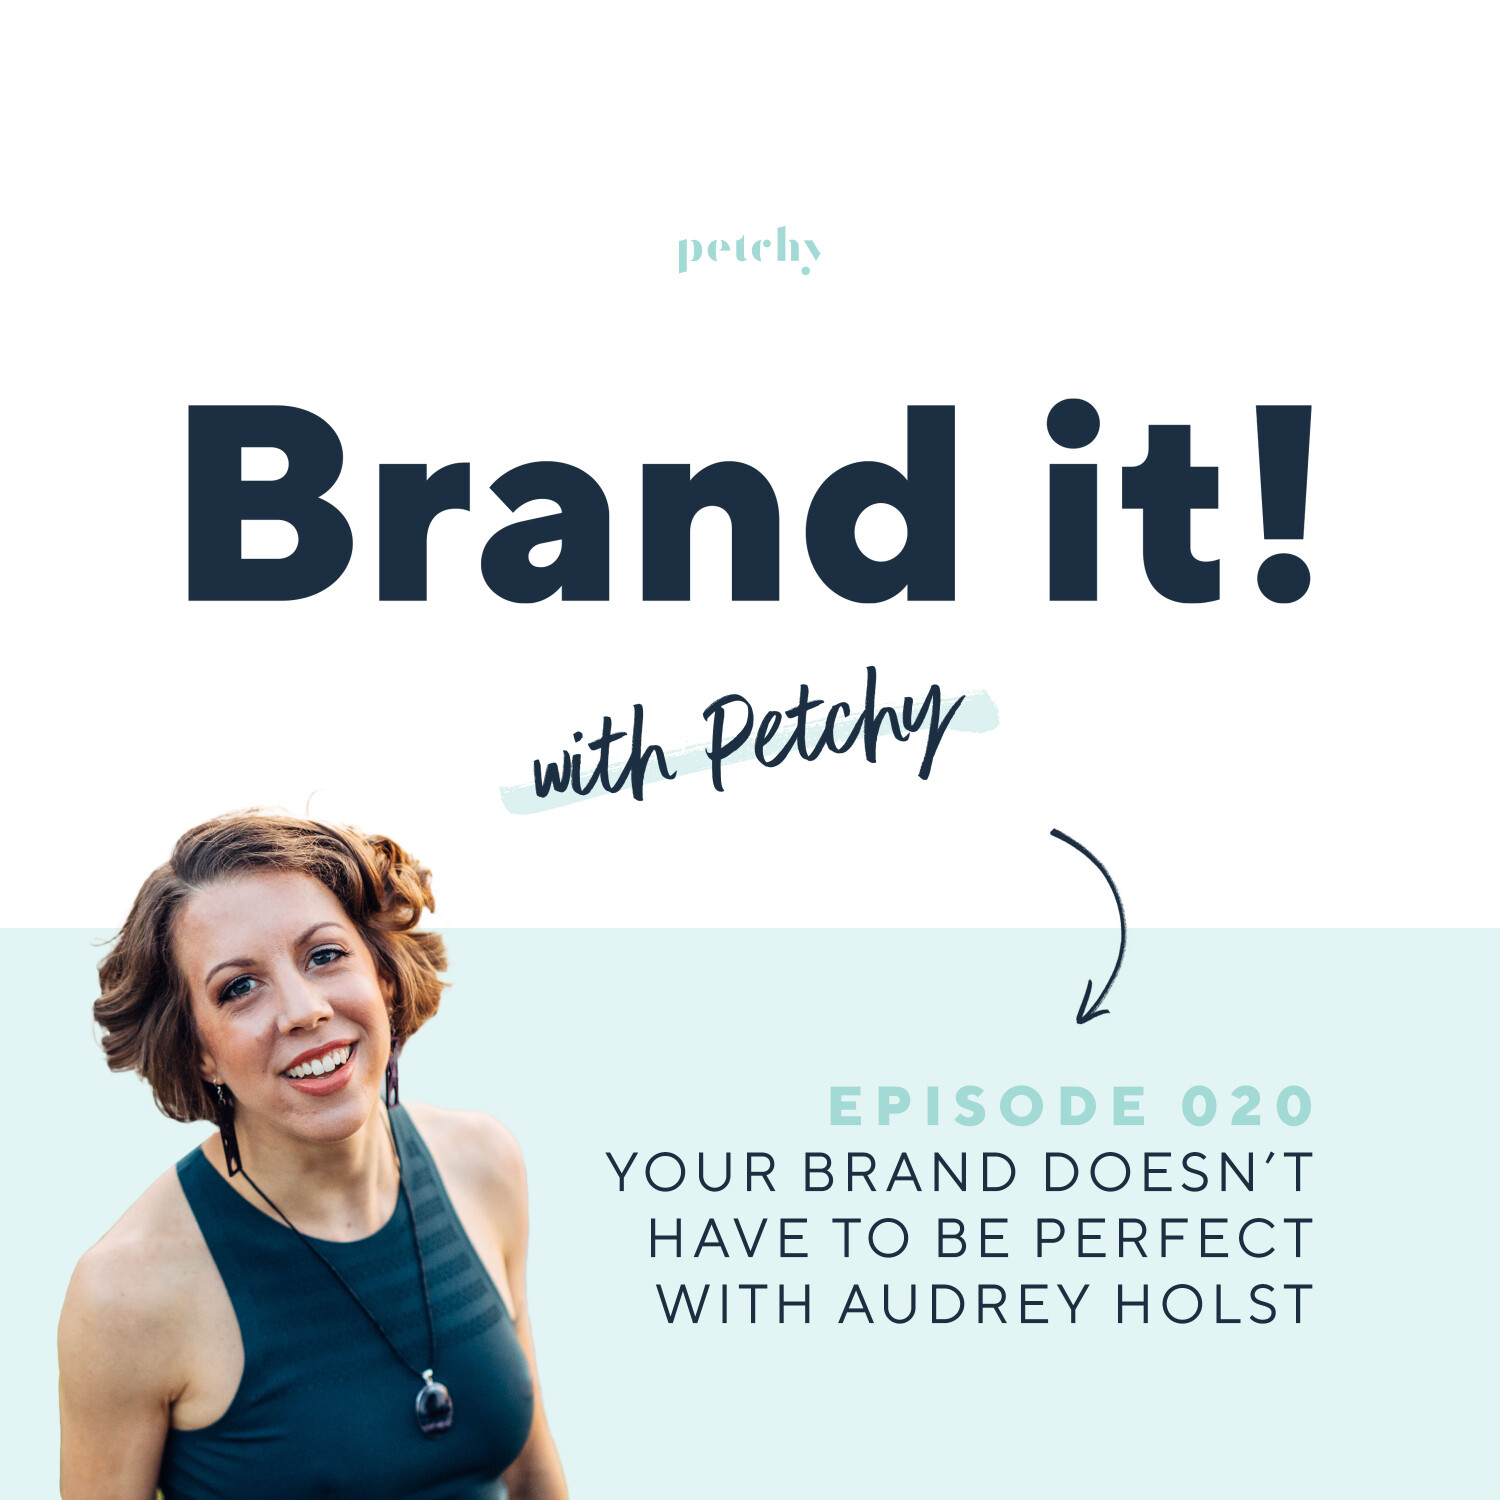 You're not perfect - and your brand doesn't have to be either w/ Audrey Holst